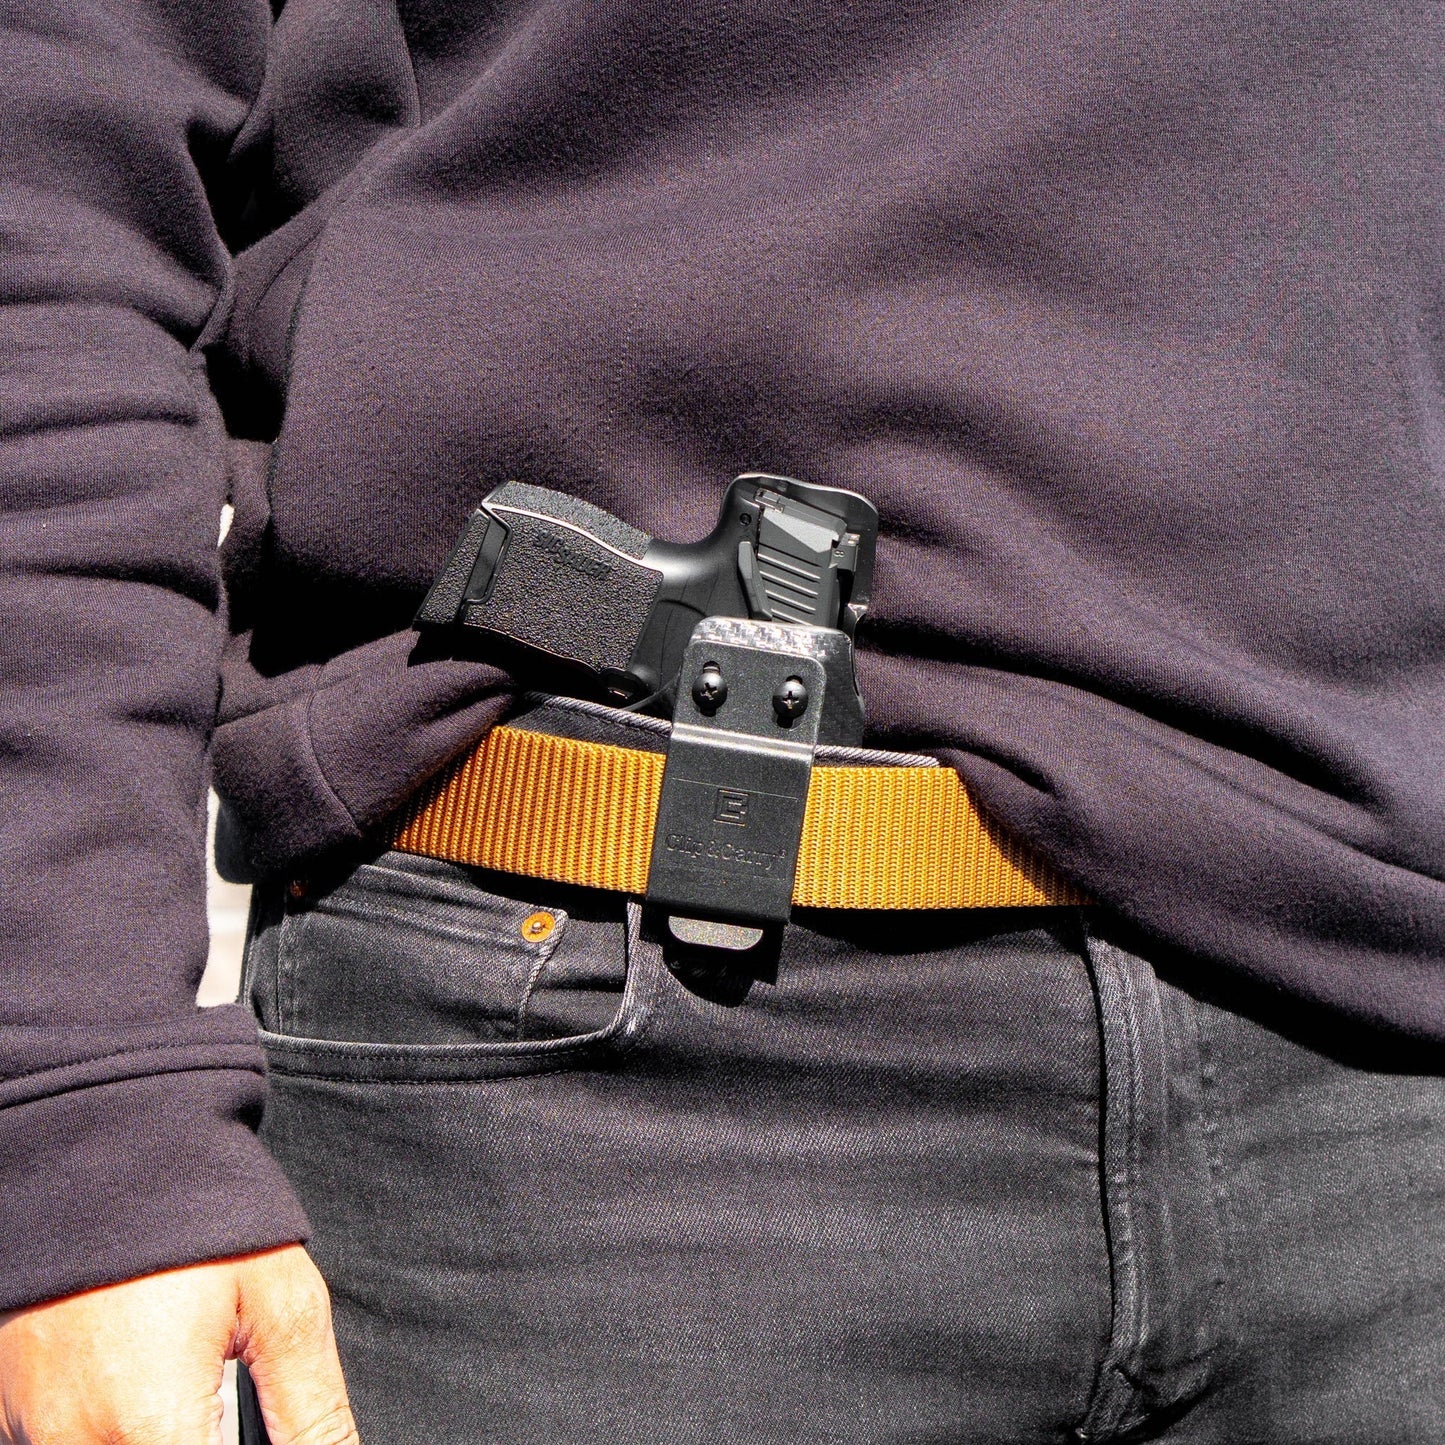 IWB Holster for the Ruger SP101 2"